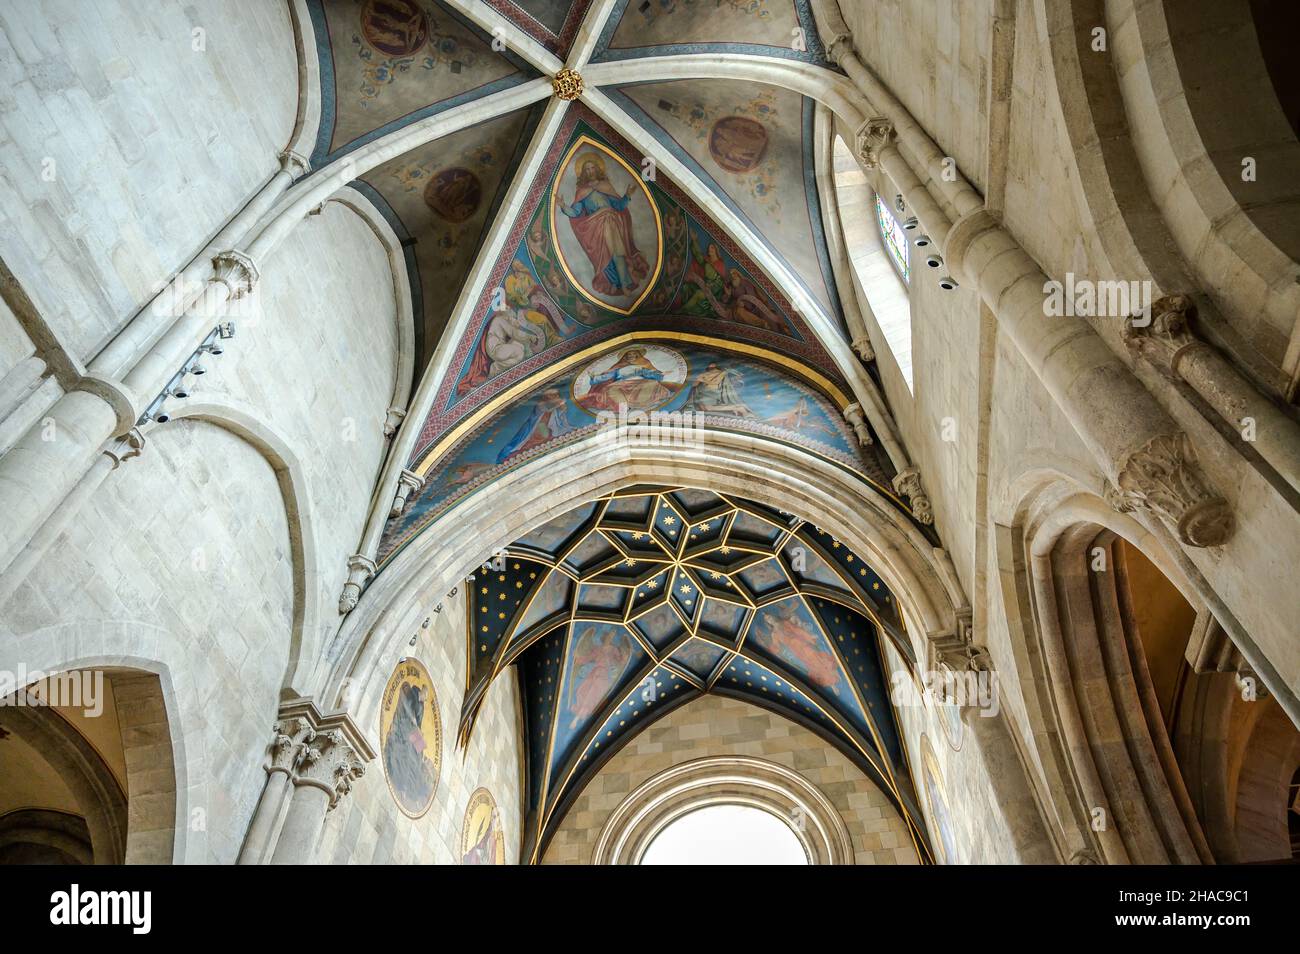 PANNONHALMA, HUNGARY - AUGUST 13, 2021: Interior of Pannonhalma Benedictine abbey with the painting of the ceiling in front of the altar in Pannonhalm Stock Photo